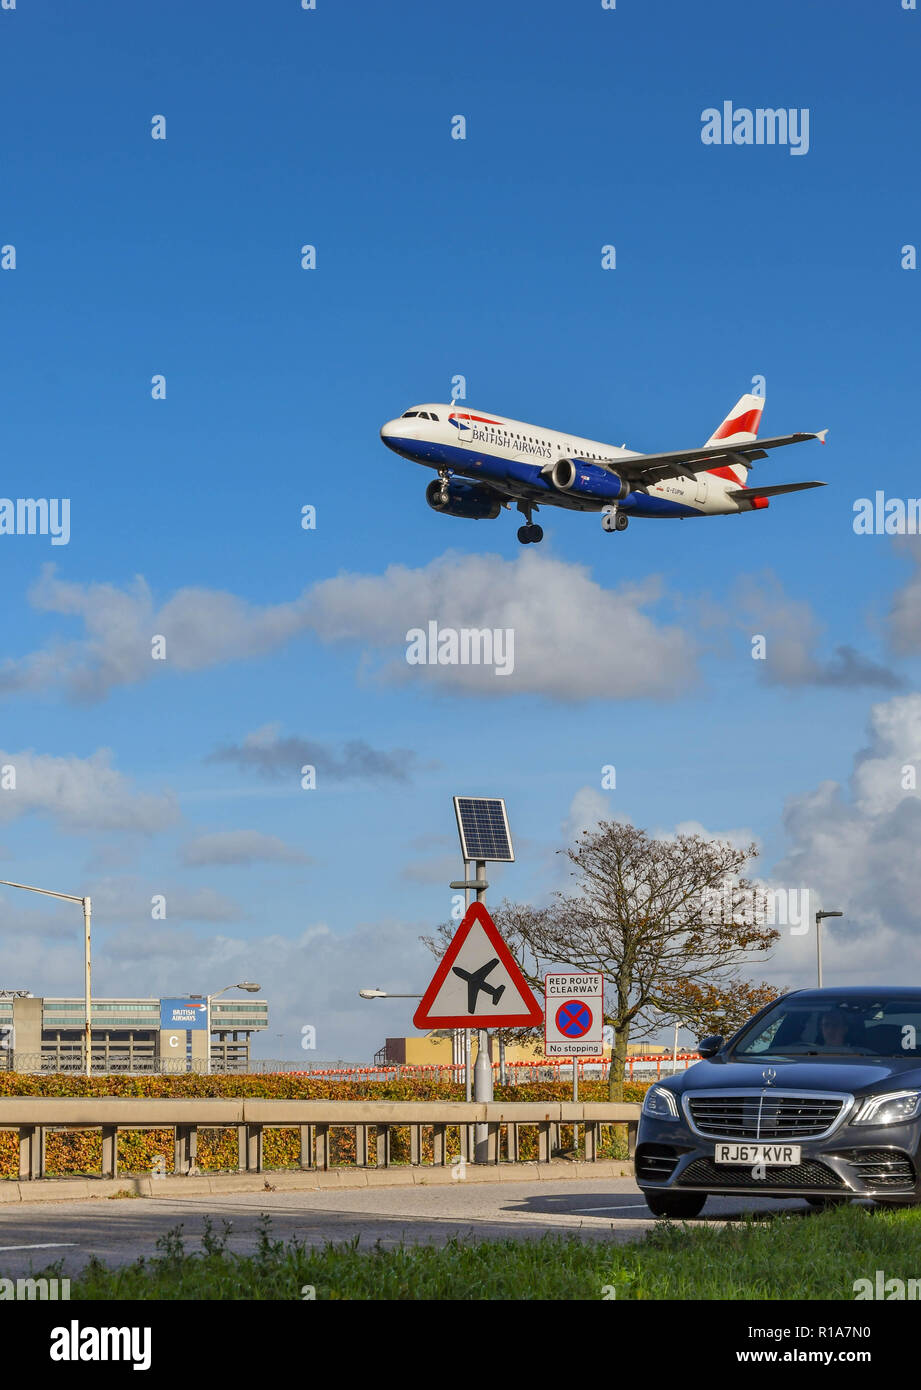 LONDON, ENGLAND - NOVEMBER 2018: Road sign on the A30 road at London Heathrow Airport warning motorists of low flying aircarft. In the background is a Stock Photo